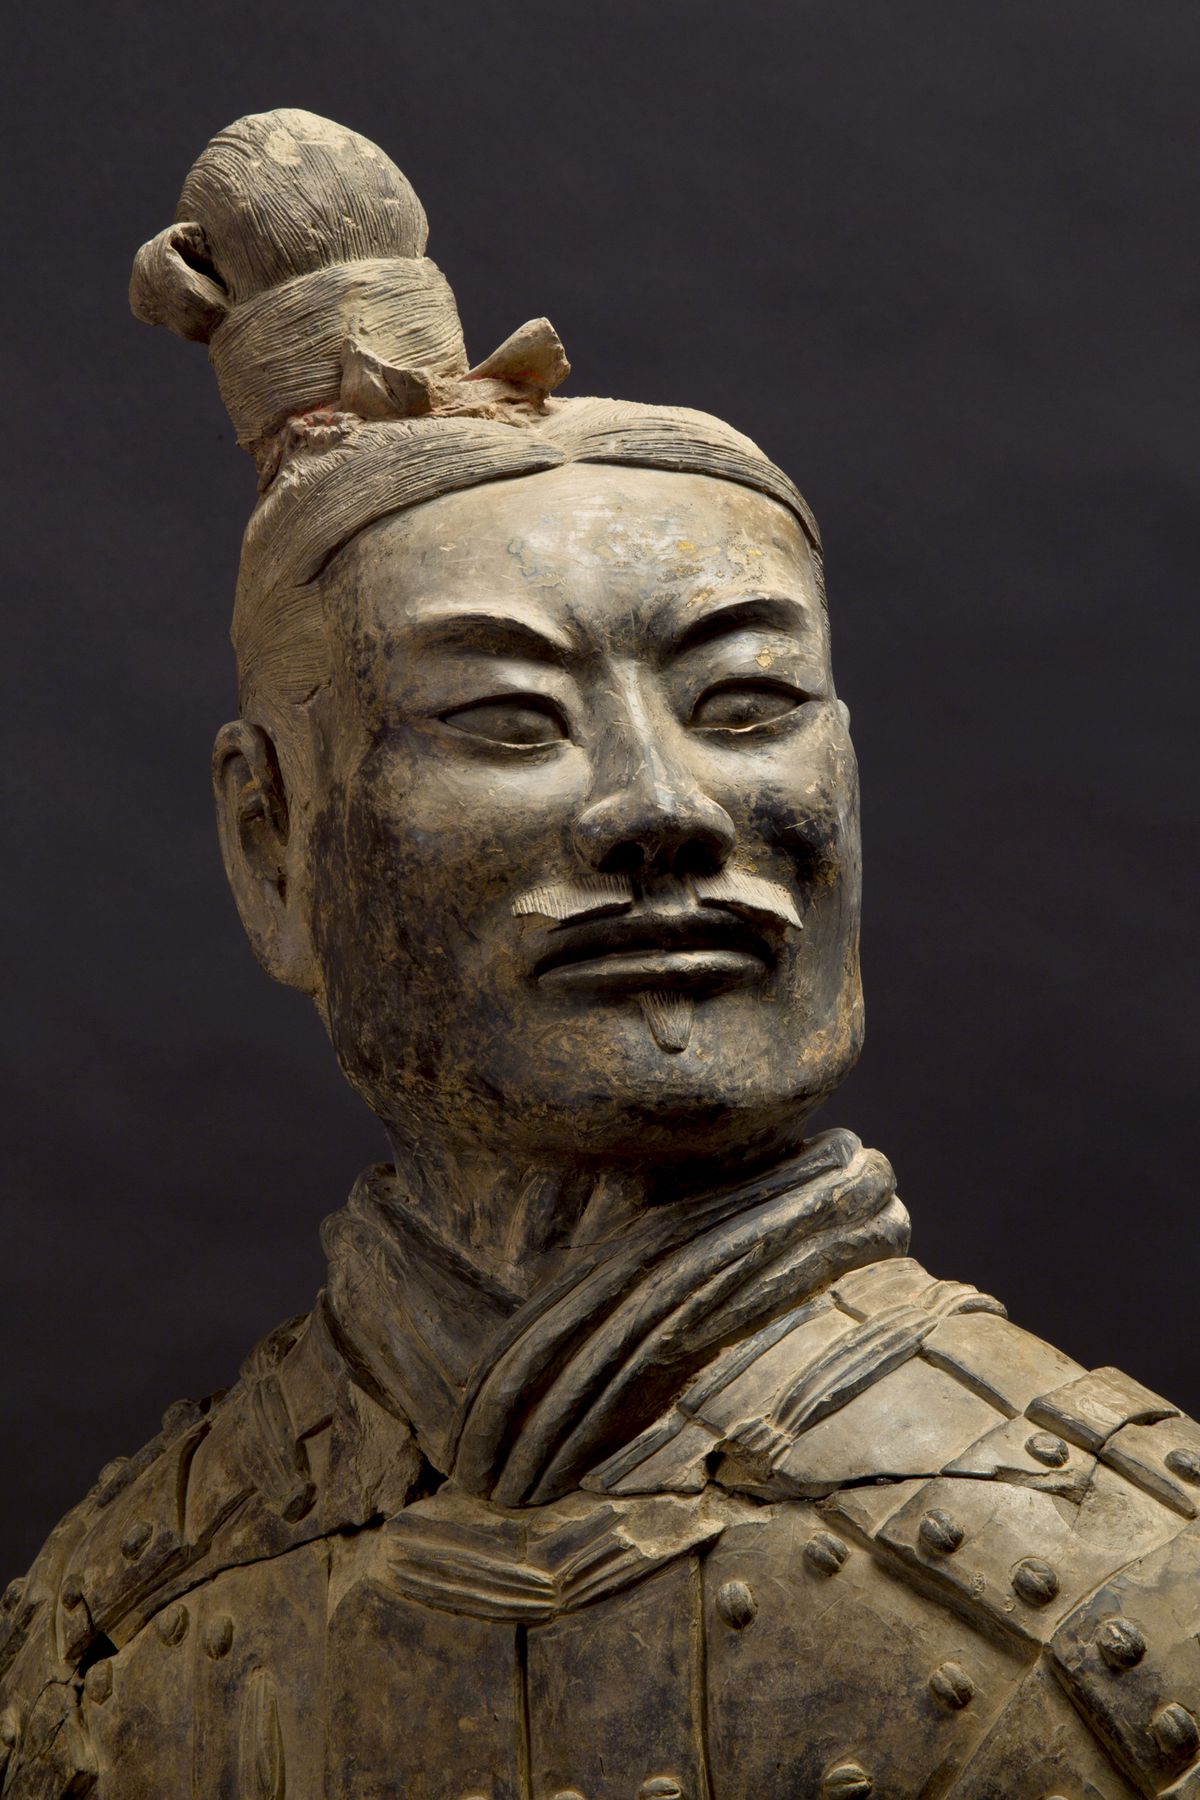 China: Detail of a warrior, Head and Chest, from the terracotta army guarding the tomb of Qin Shi Huang, first emperor of a unified China (r. 246-221 BCE), Xi’an